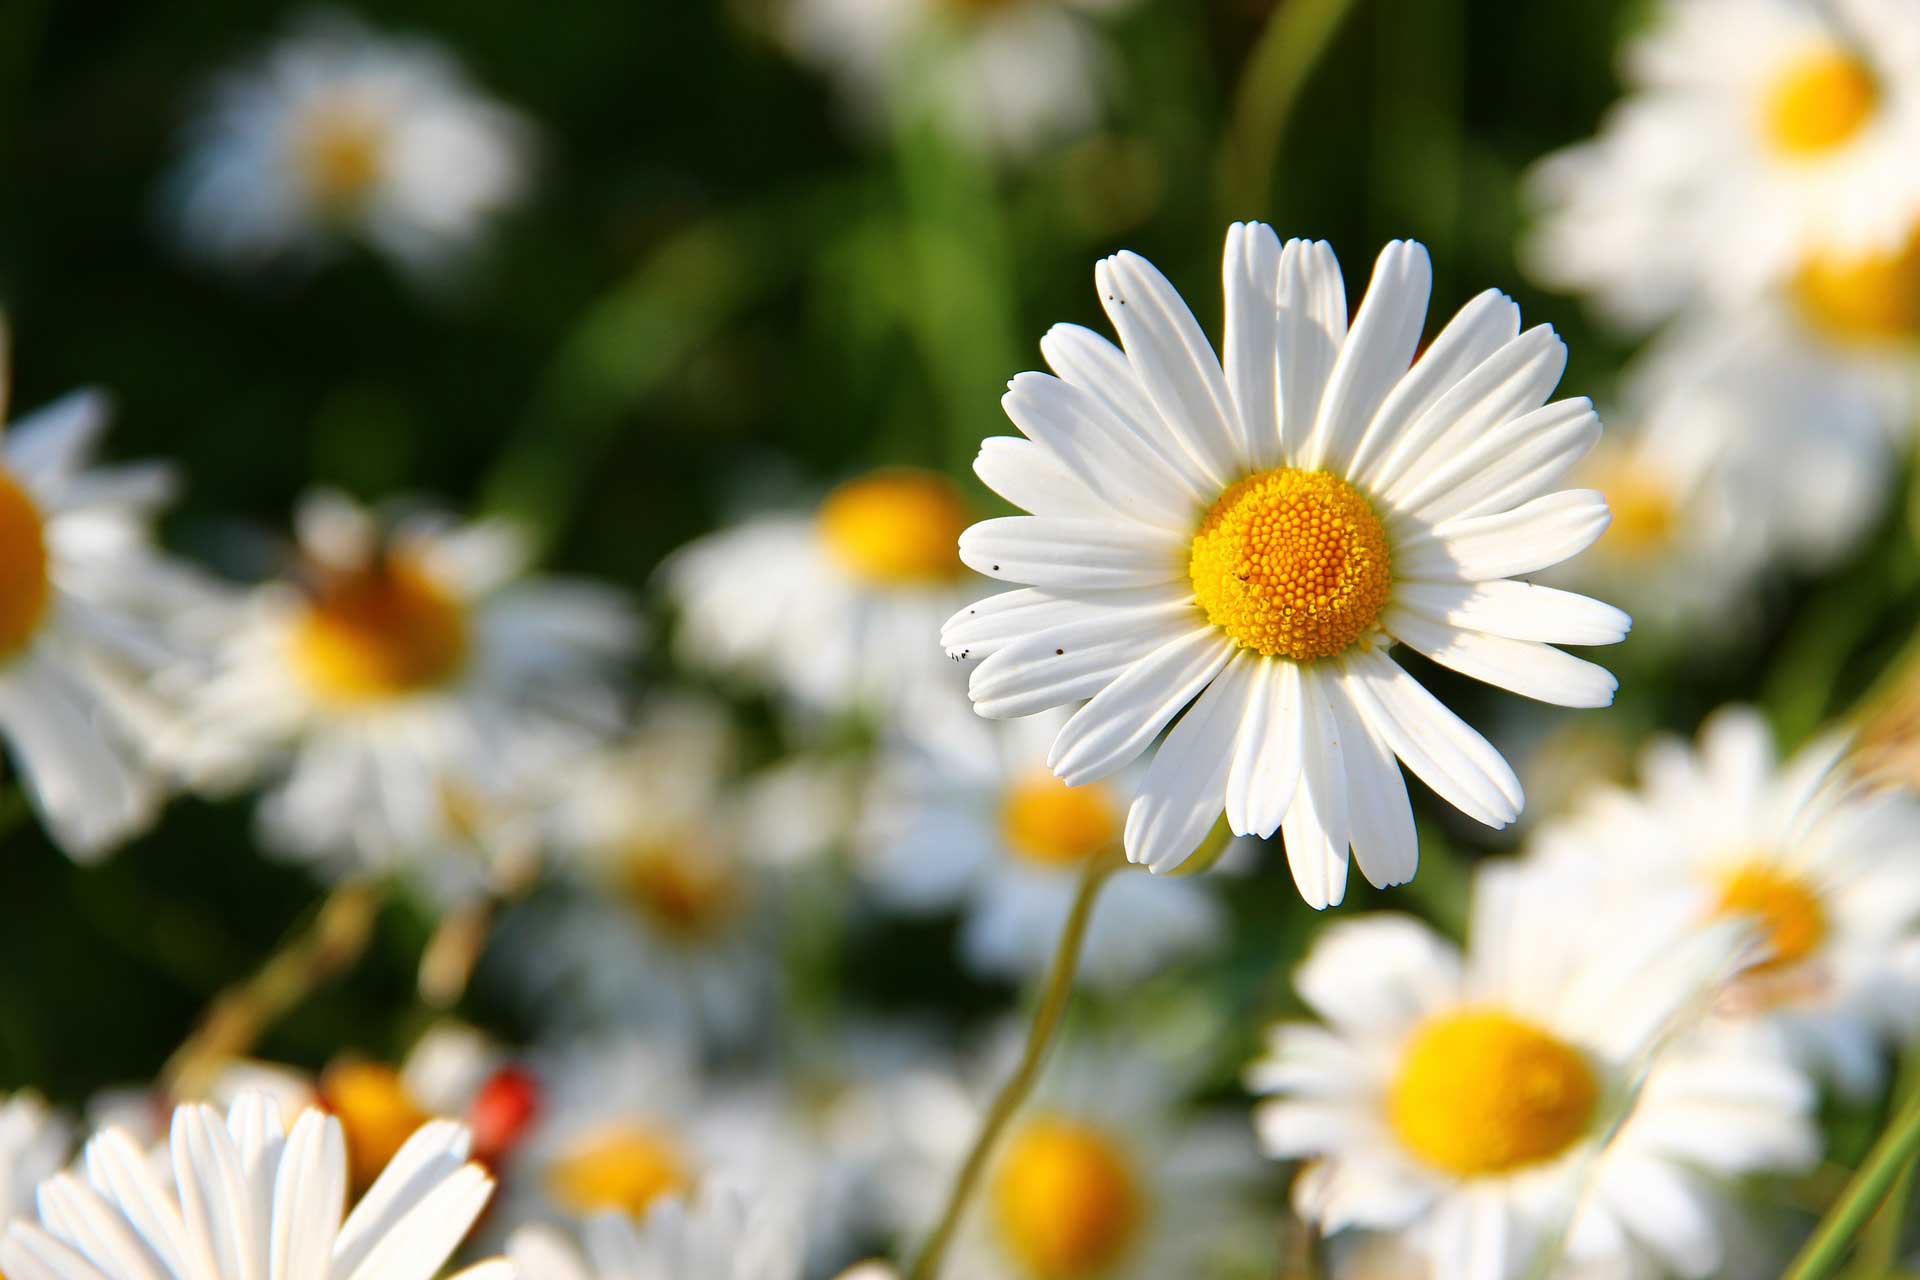 Learn about Nature | Spring Flowers: Daisy Flowers - Learn about Nature